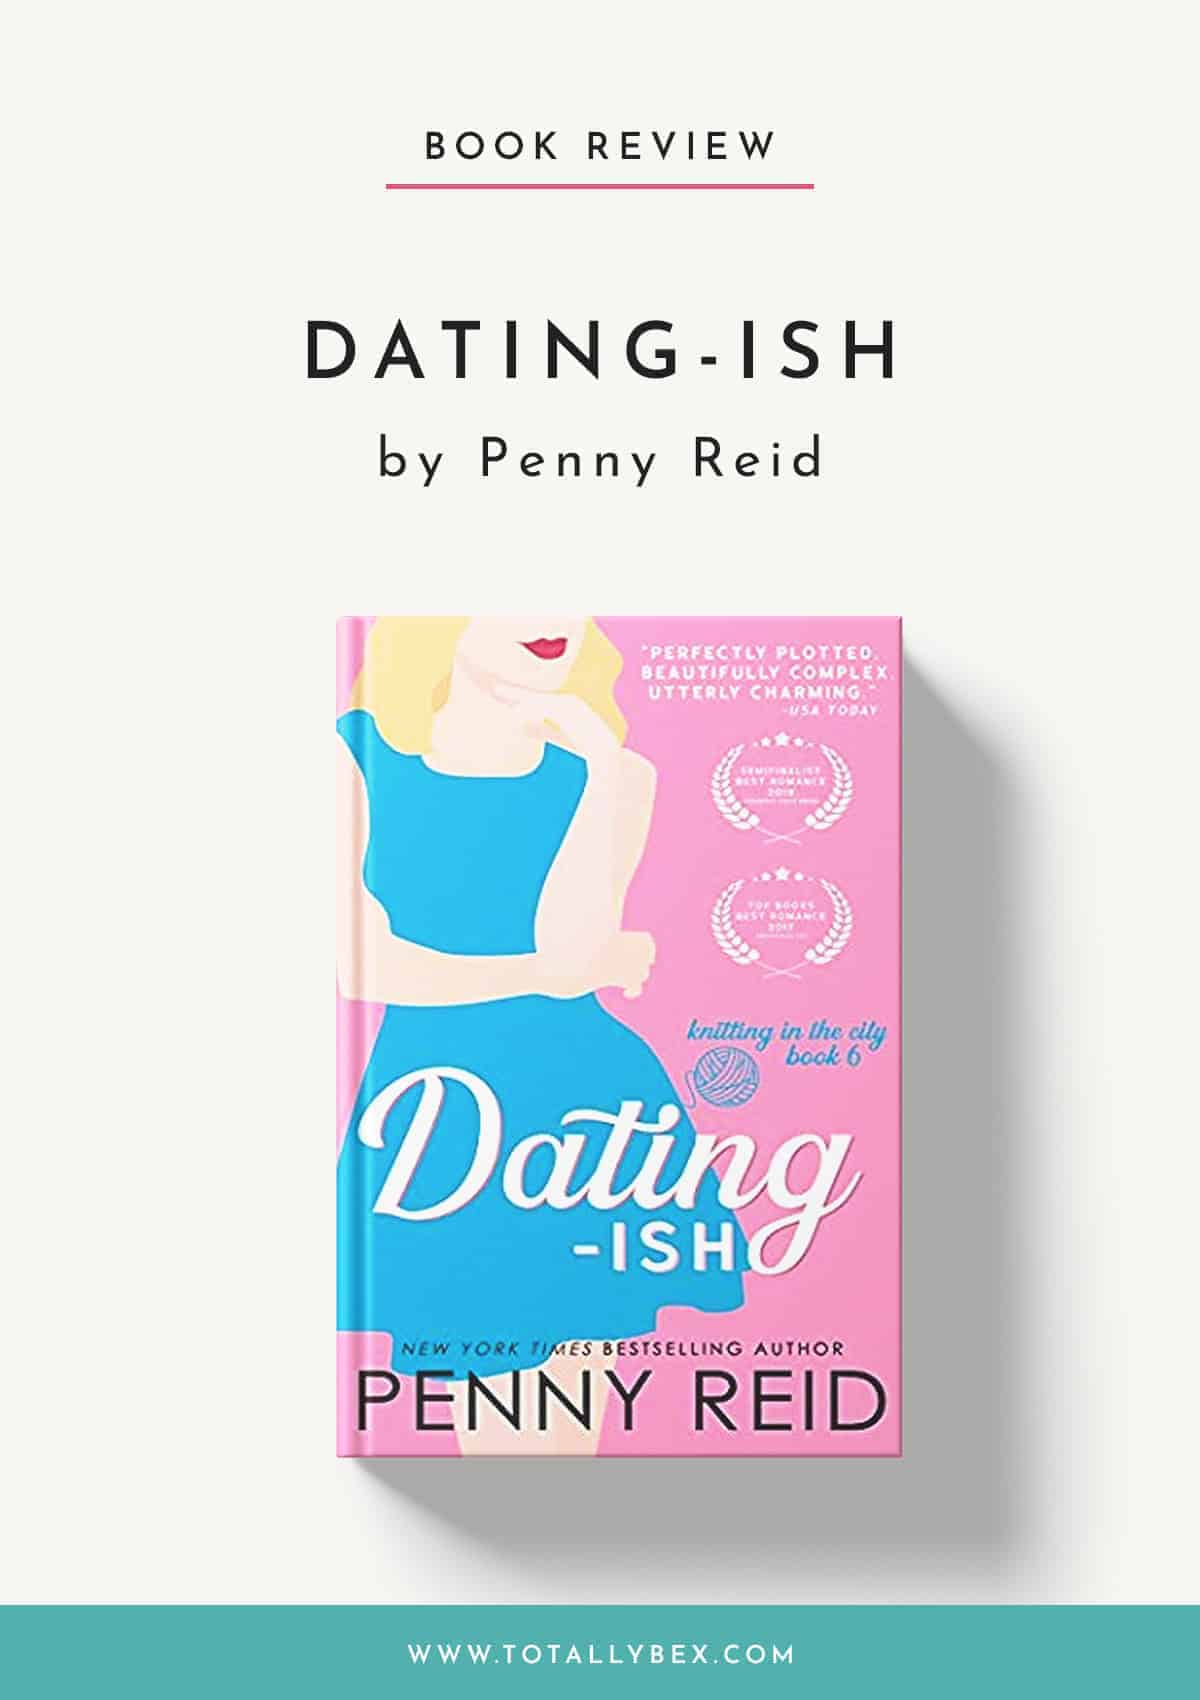 Dating-ish by Penny Reid-Book Review